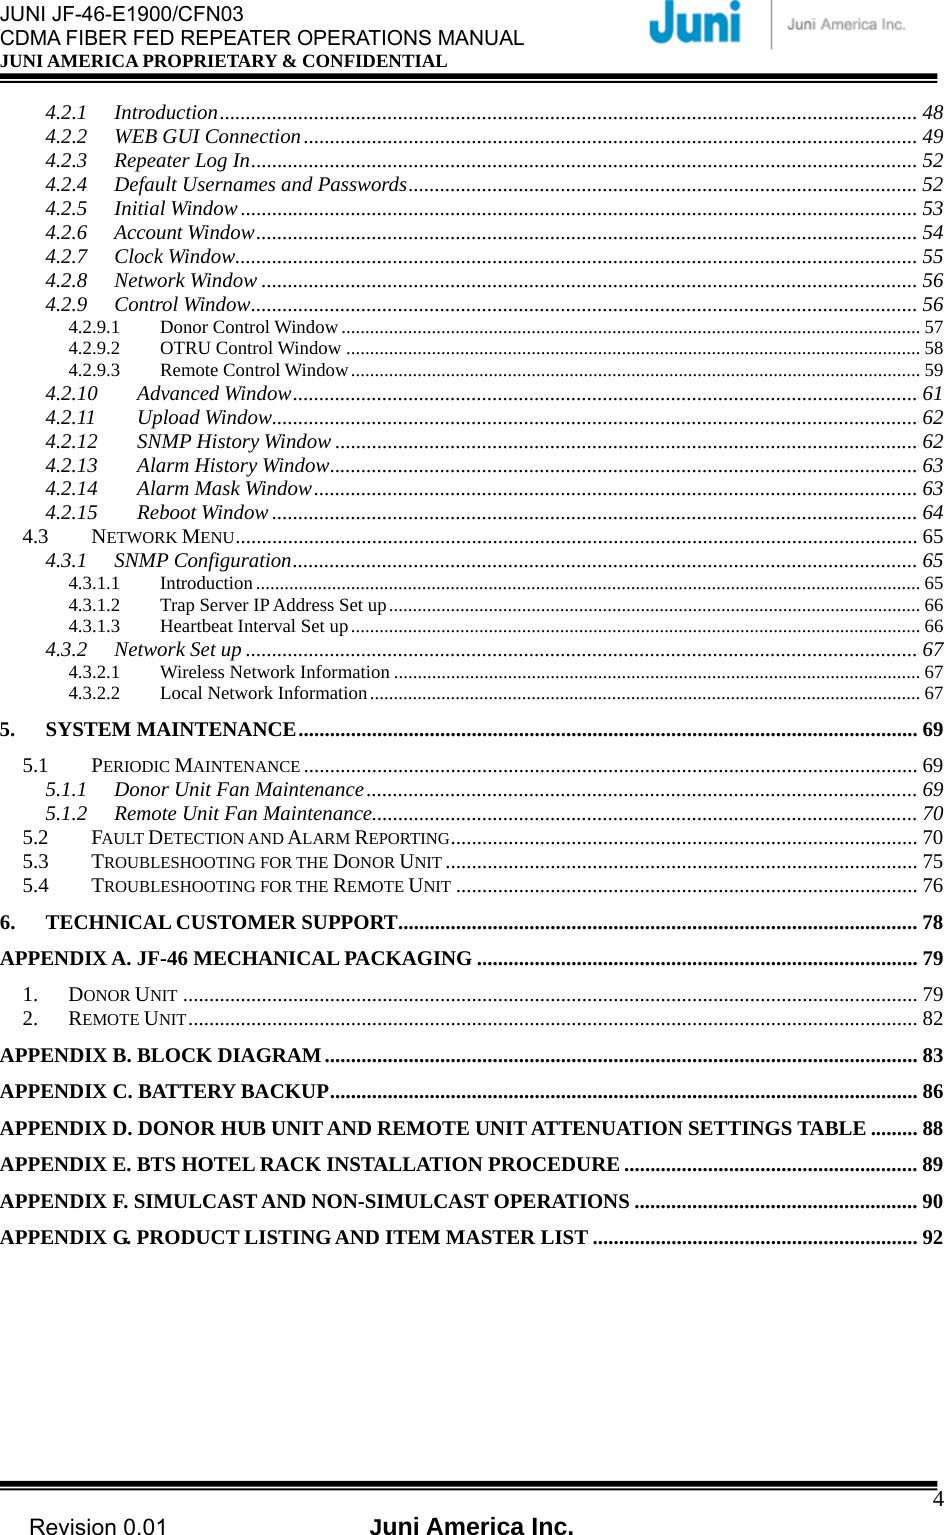  JUNI JF-46-E1900/CFN03 CDMA FIBER FED REPEATER OPERATIONS MANUAL JUNI AMERICA PROPRIETARY &amp; CONFIDENTIAL                                   Revision 0.01  Juni America Inc.  44.2.1 Introduction..................................................................................................................................... 48 4.2.2 WEB GUI Connection..................................................................................................................... 49 4.2.3 Repeater Log In............................................................................................................................... 52 4.2.4 Default Usernames and Passwords................................................................................................. 52 4.2.5 Initial Window................................................................................................................................. 53 4.2.6 Account Window.............................................................................................................................. 54 4.2.7 Clock Window.................................................................................................................................. 55 4.2.8 Network Window ............................................................................................................................. 56 4.2.9 Control Window............................................................................................................................... 56 4.2.9.1 Donor Control Window .......................................................................................................................... 57 4.2.9.2 OTRU Control Window ......................................................................................................................... 58 4.2.9.3 Remote Control Window........................................................................................................................ 59 4.2.10 Advanced Window....................................................................................................................... 61 4.2.11 Upload Window........................................................................................................................... 62 4.2.12 SNMP History Window ............................................................................................................... 62 4.2.13 Alarm History Window................................................................................................................ 63 4.2.14 Alarm Mask Window................................................................................................................... 63 4.2.15 Reboot Window ........................................................................................................................... 64 4.3 NETWORK MENU.................................................................................................................................. 65 4.3.1 SNMP Configuration....................................................................................................................... 65 4.3.1.1 Introduction............................................................................................................................................ 65 4.3.1.2 Trap Server IP Address Set up................................................................................................................ 66 4.3.1.3 Heartbeat Interval Set up........................................................................................................................ 66 4.3.2 Network Set up ................................................................................................................................ 67 4.3.2.1 Wireless Network Information ............................................................................................................... 67 4.3.2.2 Local Network Information.................................................................................................................... 67 5. SYSTEM MAINTENANCE...................................................................................................................... 69 5.1 PERIODIC MAINTENANCE ..................................................................................................................... 69 5.1.1 Donor Unit Fan Maintenance......................................................................................................... 69 5.1.2 Remote Unit Fan Maintenance........................................................................................................ 70 5.2 FAULT DETECTION AND ALARM REPORTING......................................................................................... 70 5.3 TROUBLESHOOTING FOR THE DONOR UNIT .......................................................................................... 75 5.4 TROUBLESHOOTING FOR THE REMOTE UNIT ........................................................................................ 76 6. TECHNICAL CUSTOMER SUPPORT................................................................................................... 78 APPENDIX A. JF-46 MECHANICAL PACKAGING .................................................................................... 79 1. DONOR UNIT ............................................................................................................................................ 79 2. REMOTE UNIT........................................................................................................................................... 82 APPENDIX B. BLOCK DIAGRAM................................................................................................................. 83 APPENDIX C. BATTERY BACKUP................................................................................................................ 86 APPENDIX D. DONOR HUB UNIT AND REMOTE UNIT ATTENUATION SETTINGS TABLE ......... 88 APPENDIX E. BTS HOTEL RACK INSTALLATION PROCEDURE ........................................................ 89 APPENDIX F. SIMULCAST AND NON-SIMULCAST OPERATIONS ...................................................... 90 APPENDIX G. PRODUCT LISTING AND ITEM MASTER LIST .............................................................. 92  